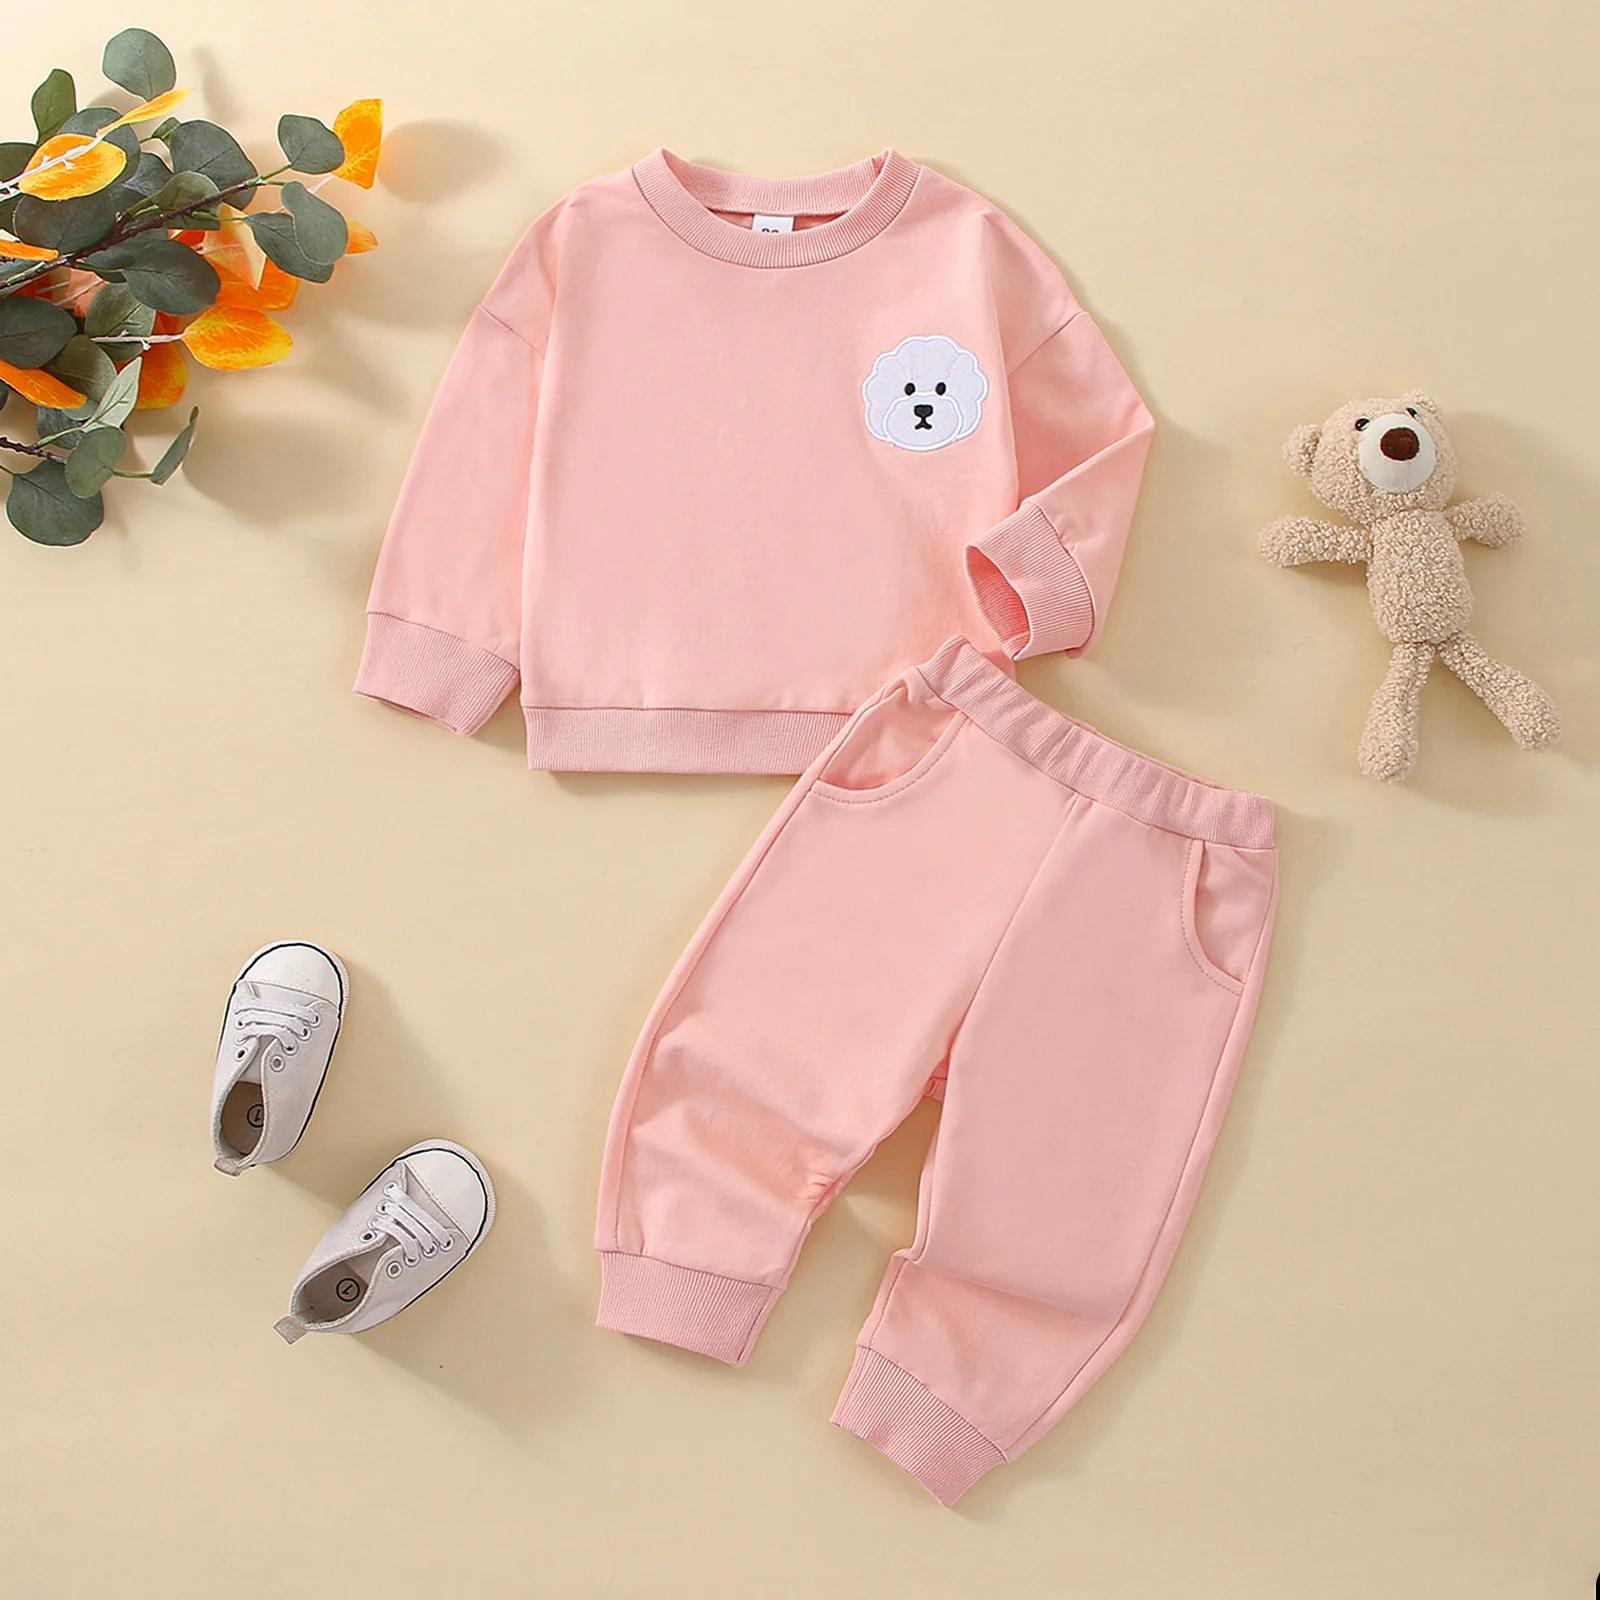 Infant Baby Girls Boys Sweatshirts Autumn Clothing Suit Embroidery Long Sleeve Pullvoer Trousers Kids Clothes Cotton